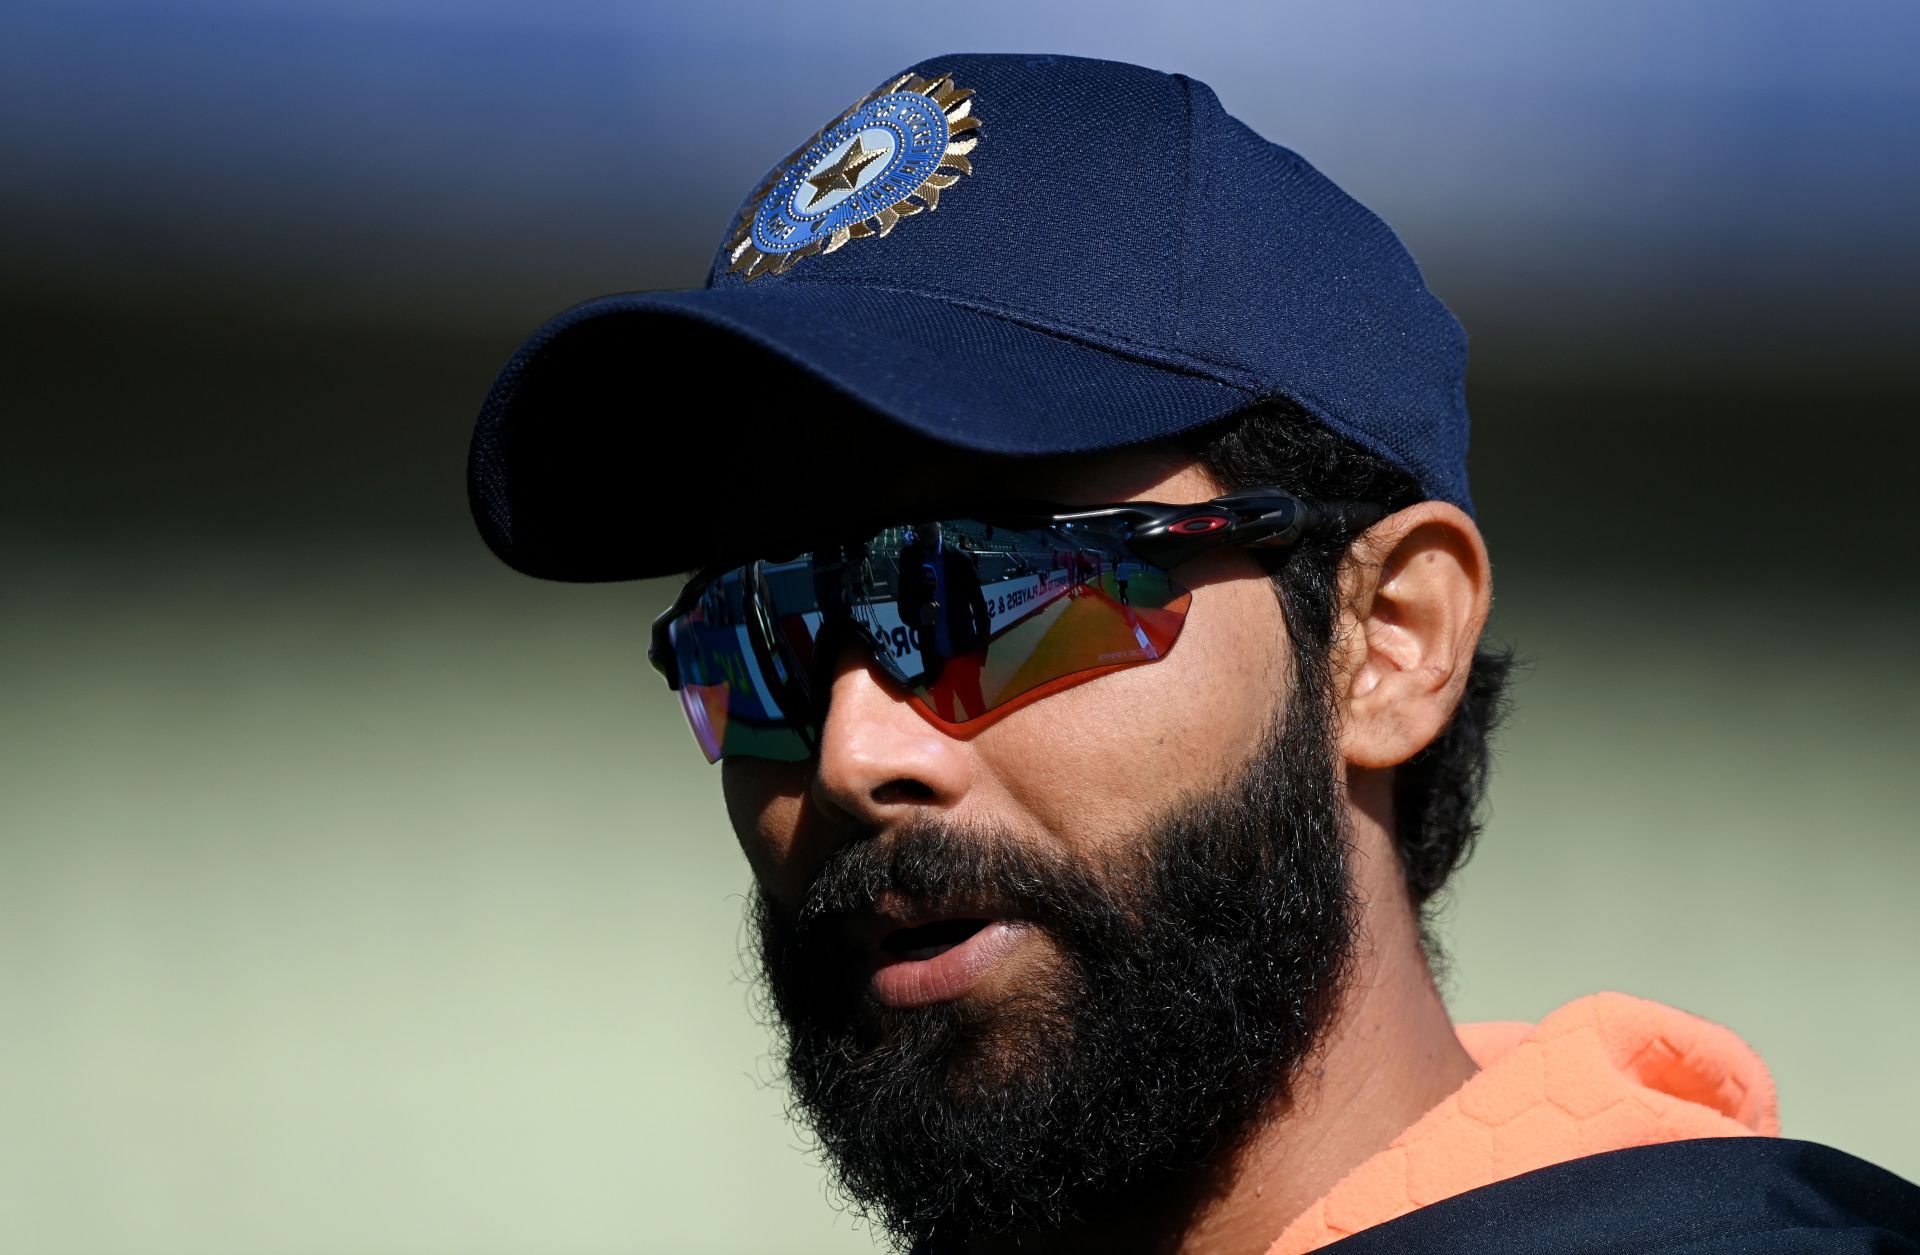 Ravindra Jadeja has clarified that the IPL was not on his mind when he came out to play in Birmingham (Image courtesy: Getty)